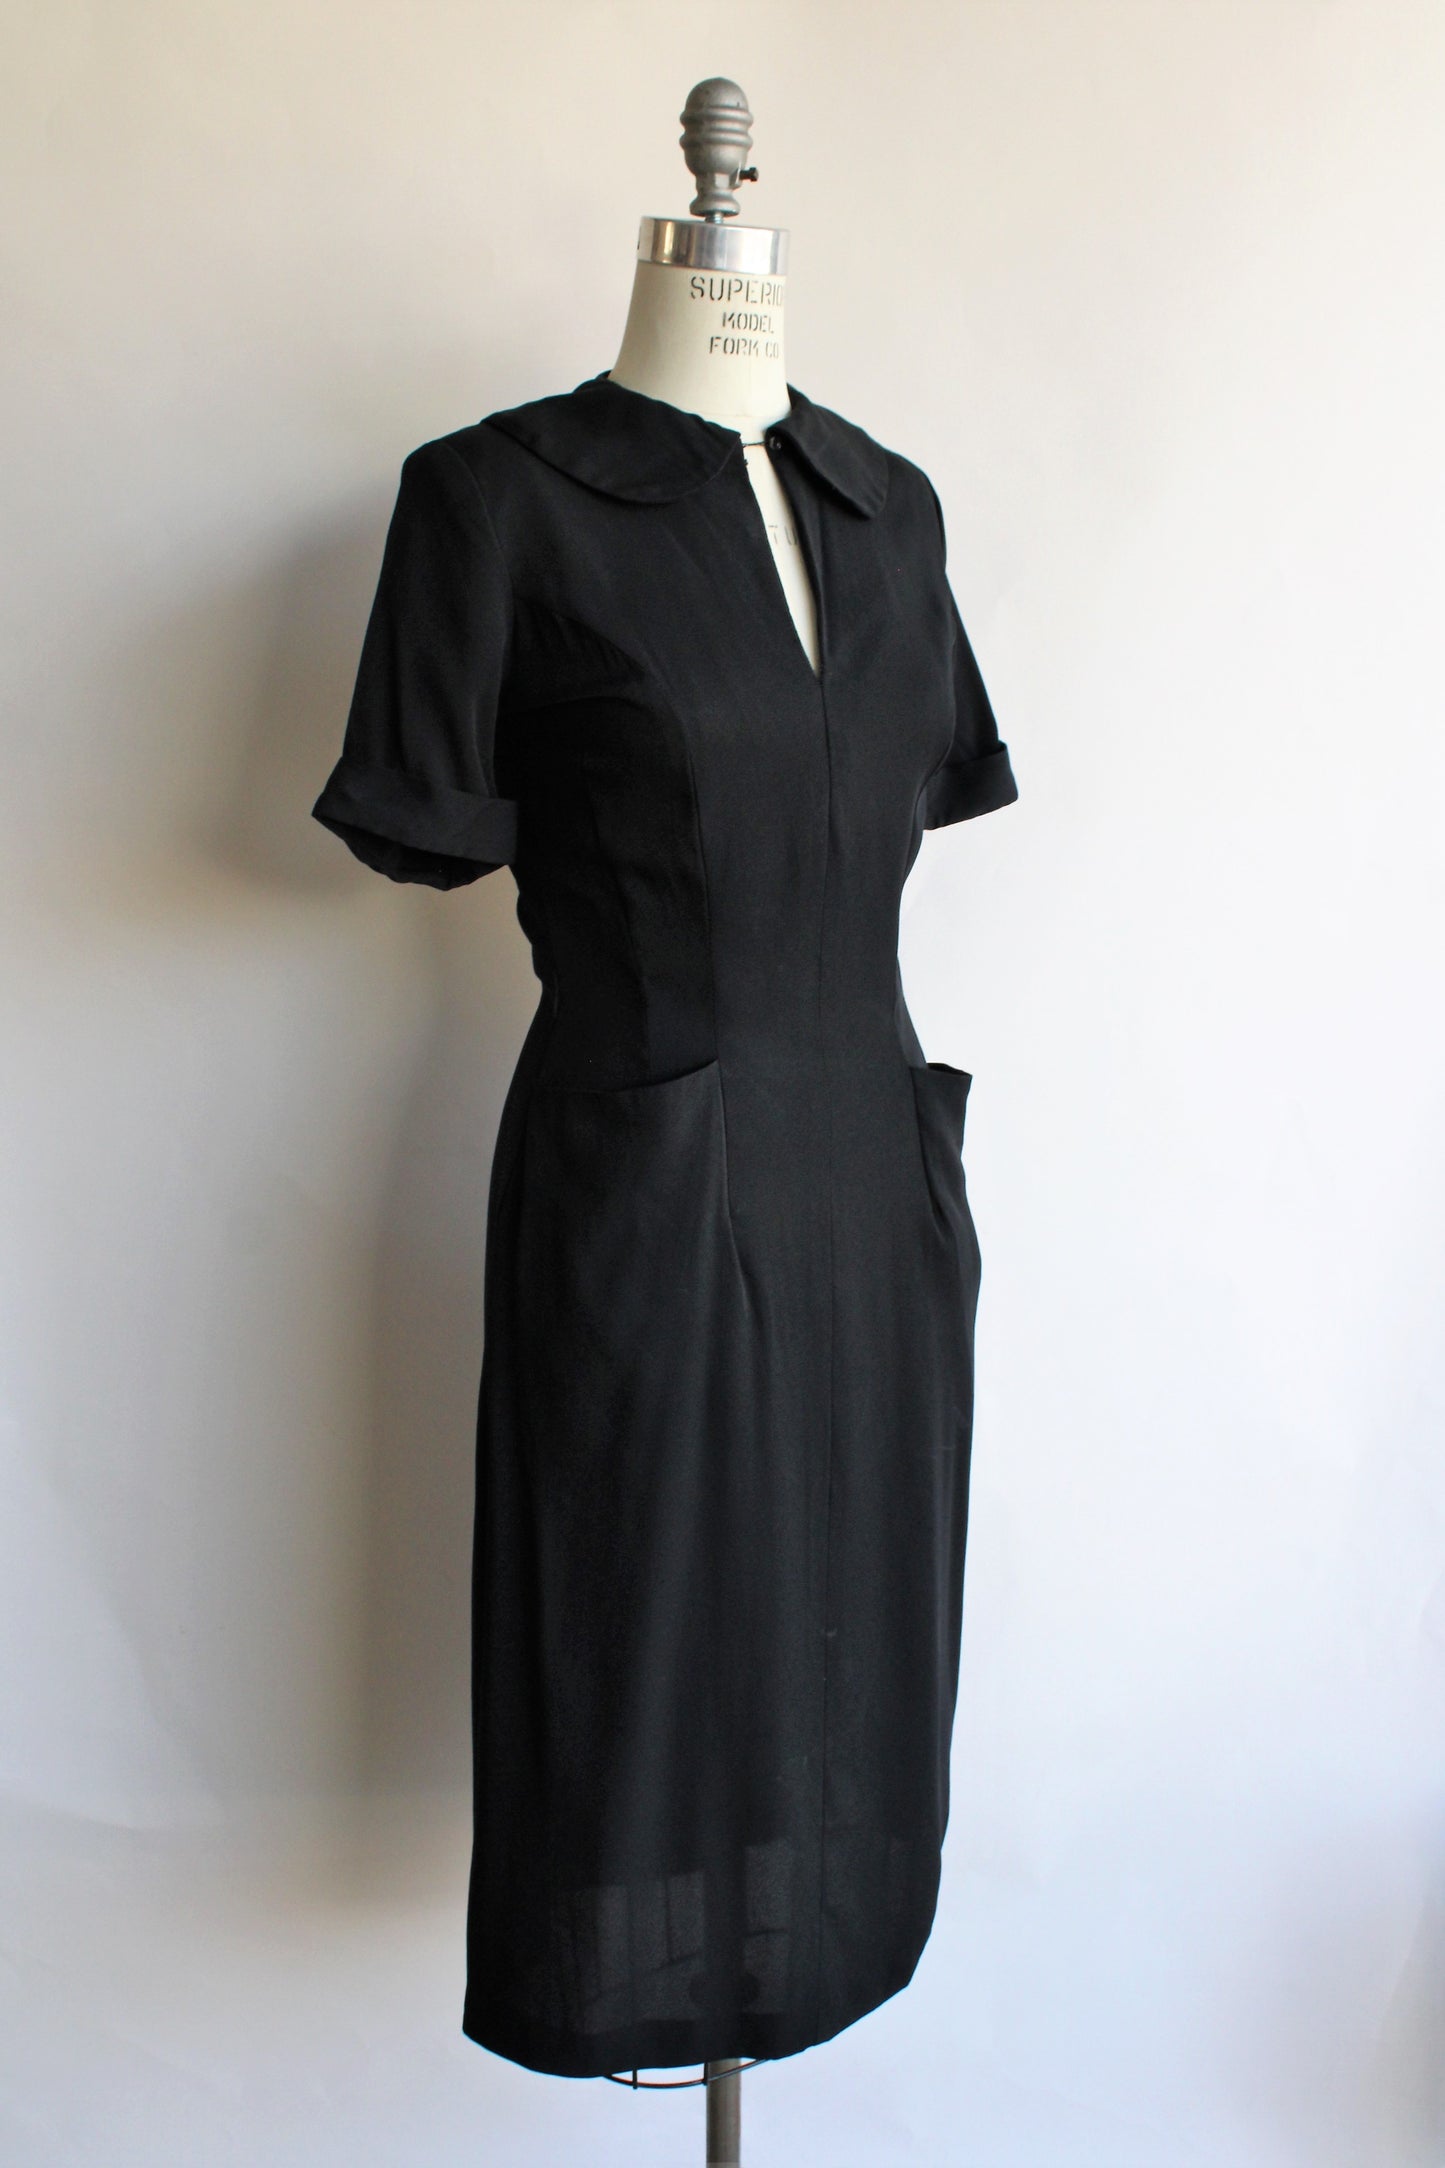 Vintage 1940s Rayon Crepe Dress with Pockets, Keyhole Neck and Peter Pan Collar